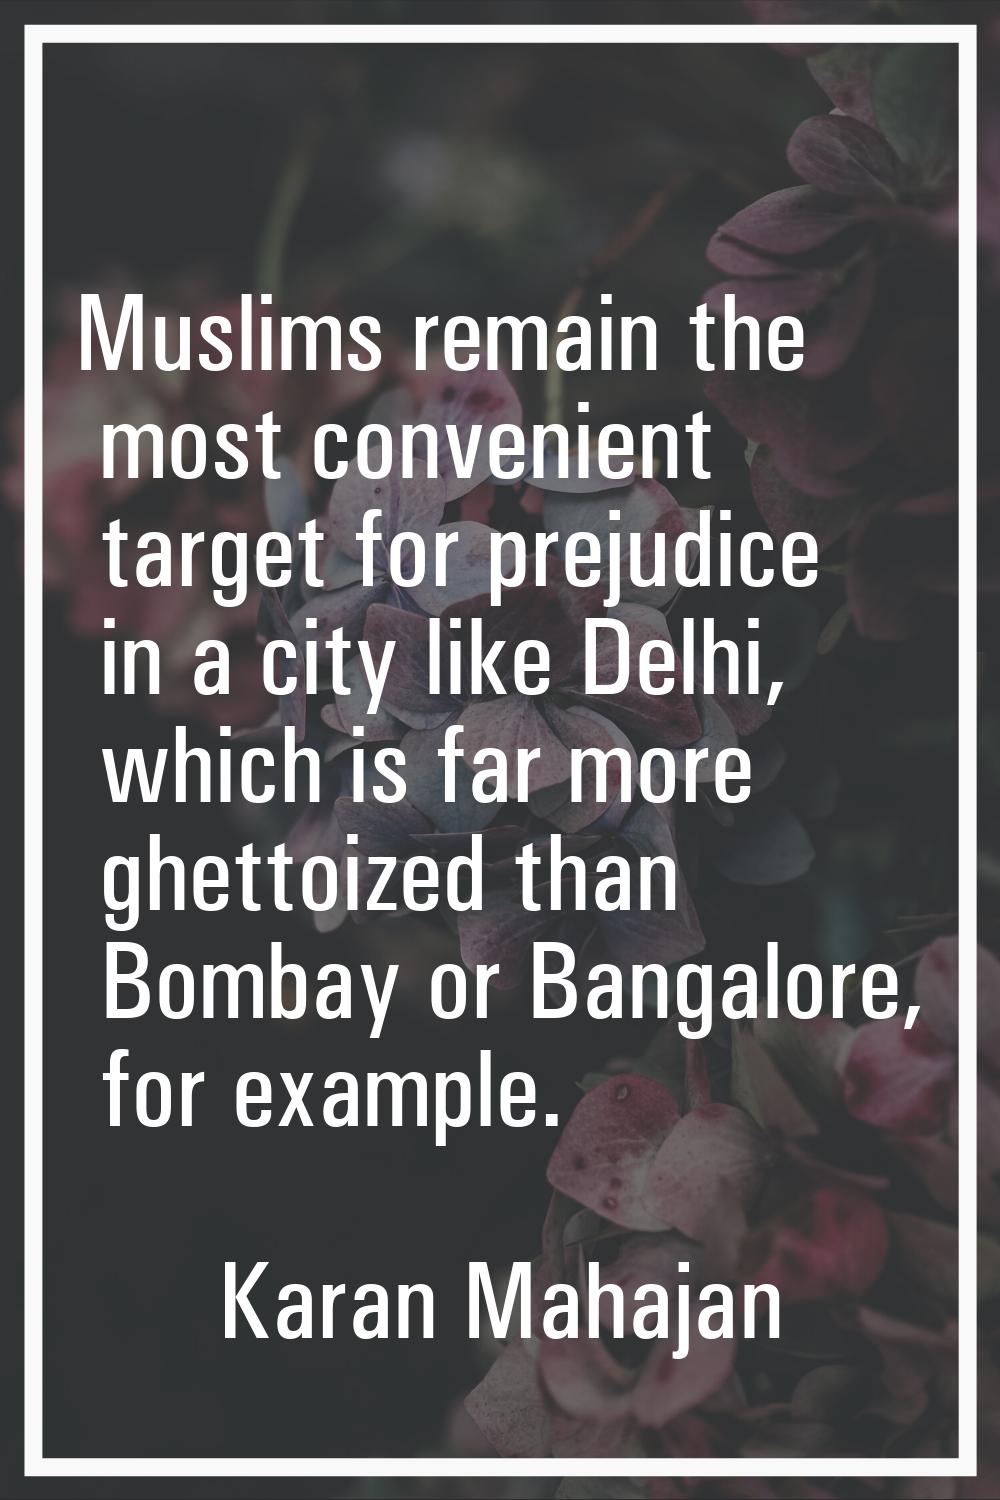 Muslims remain the most convenient target for prejudice in a city like Delhi, which is far more ghe